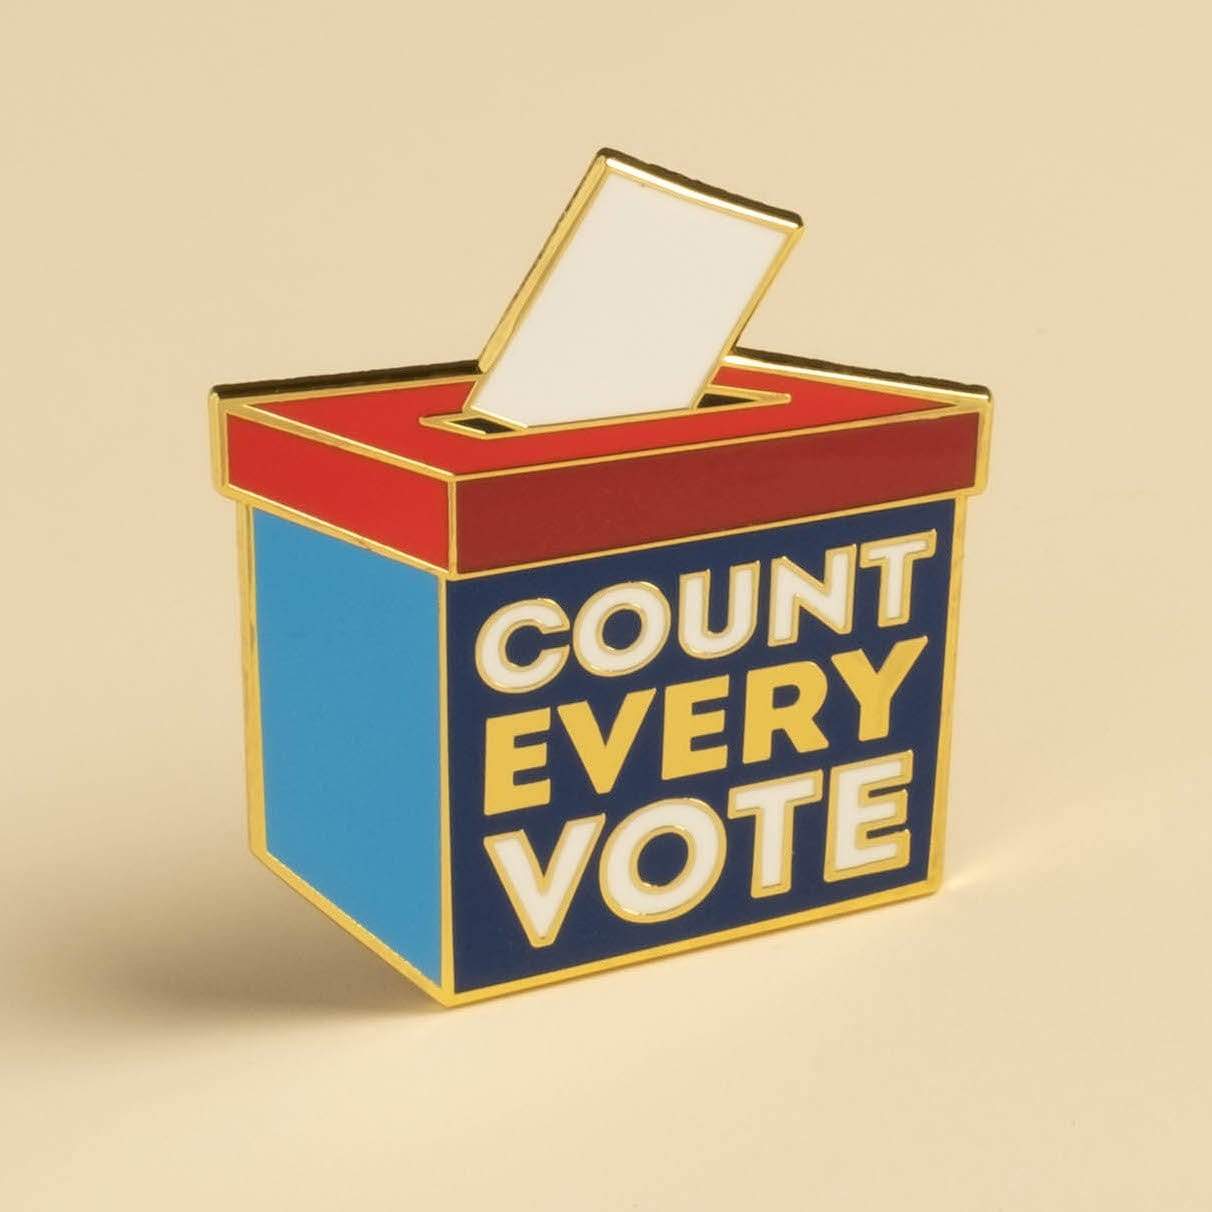 Count Every Vote Pin